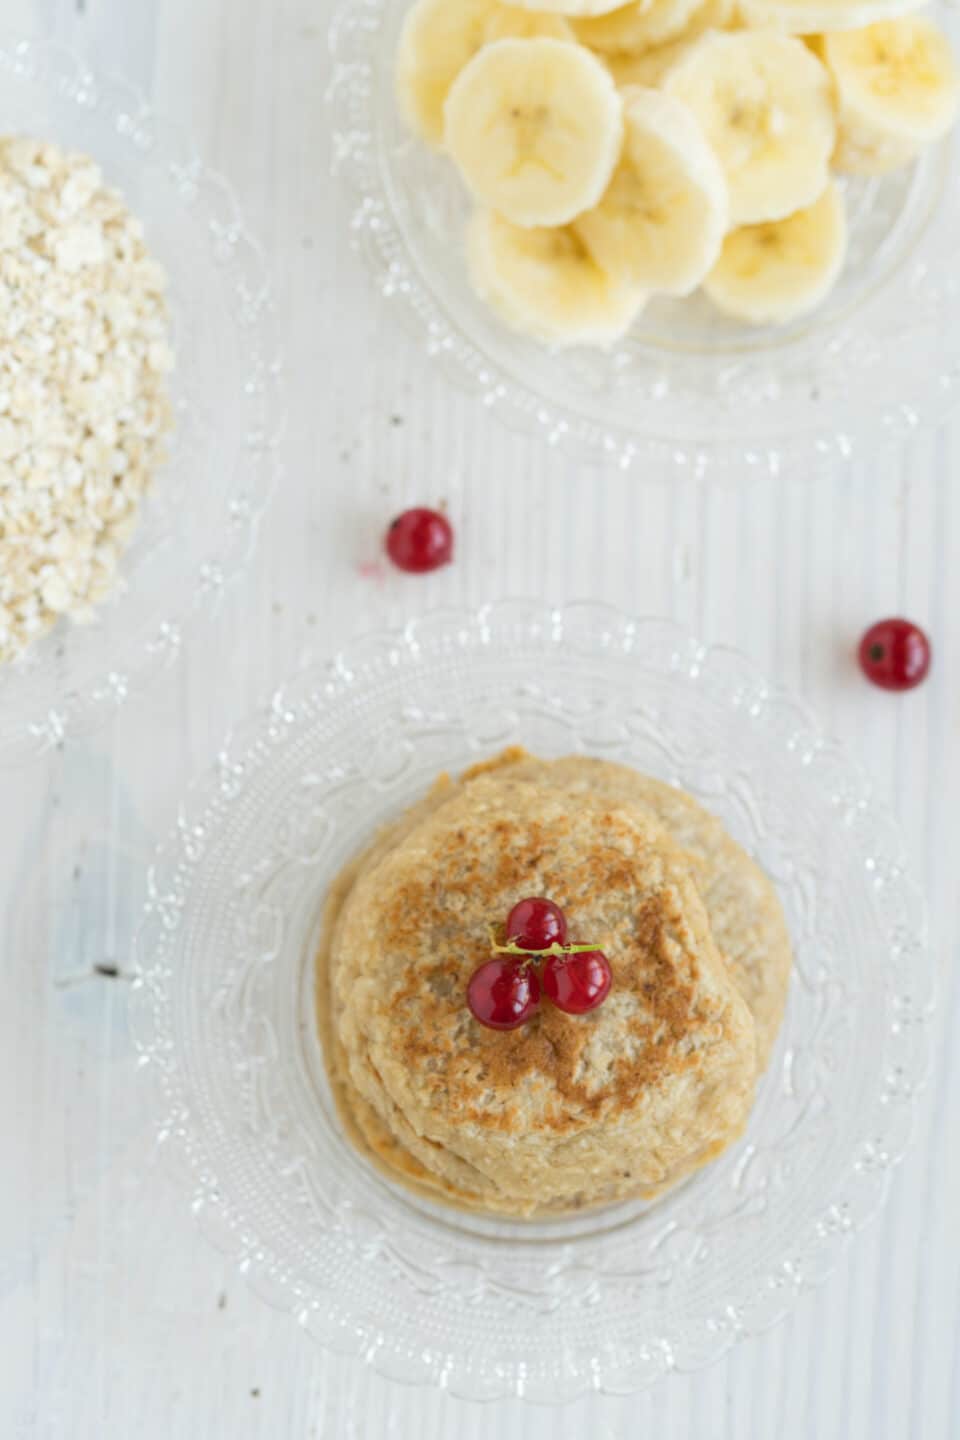 Easy and Quick Recipe for Banana Oatmeal Pancakes